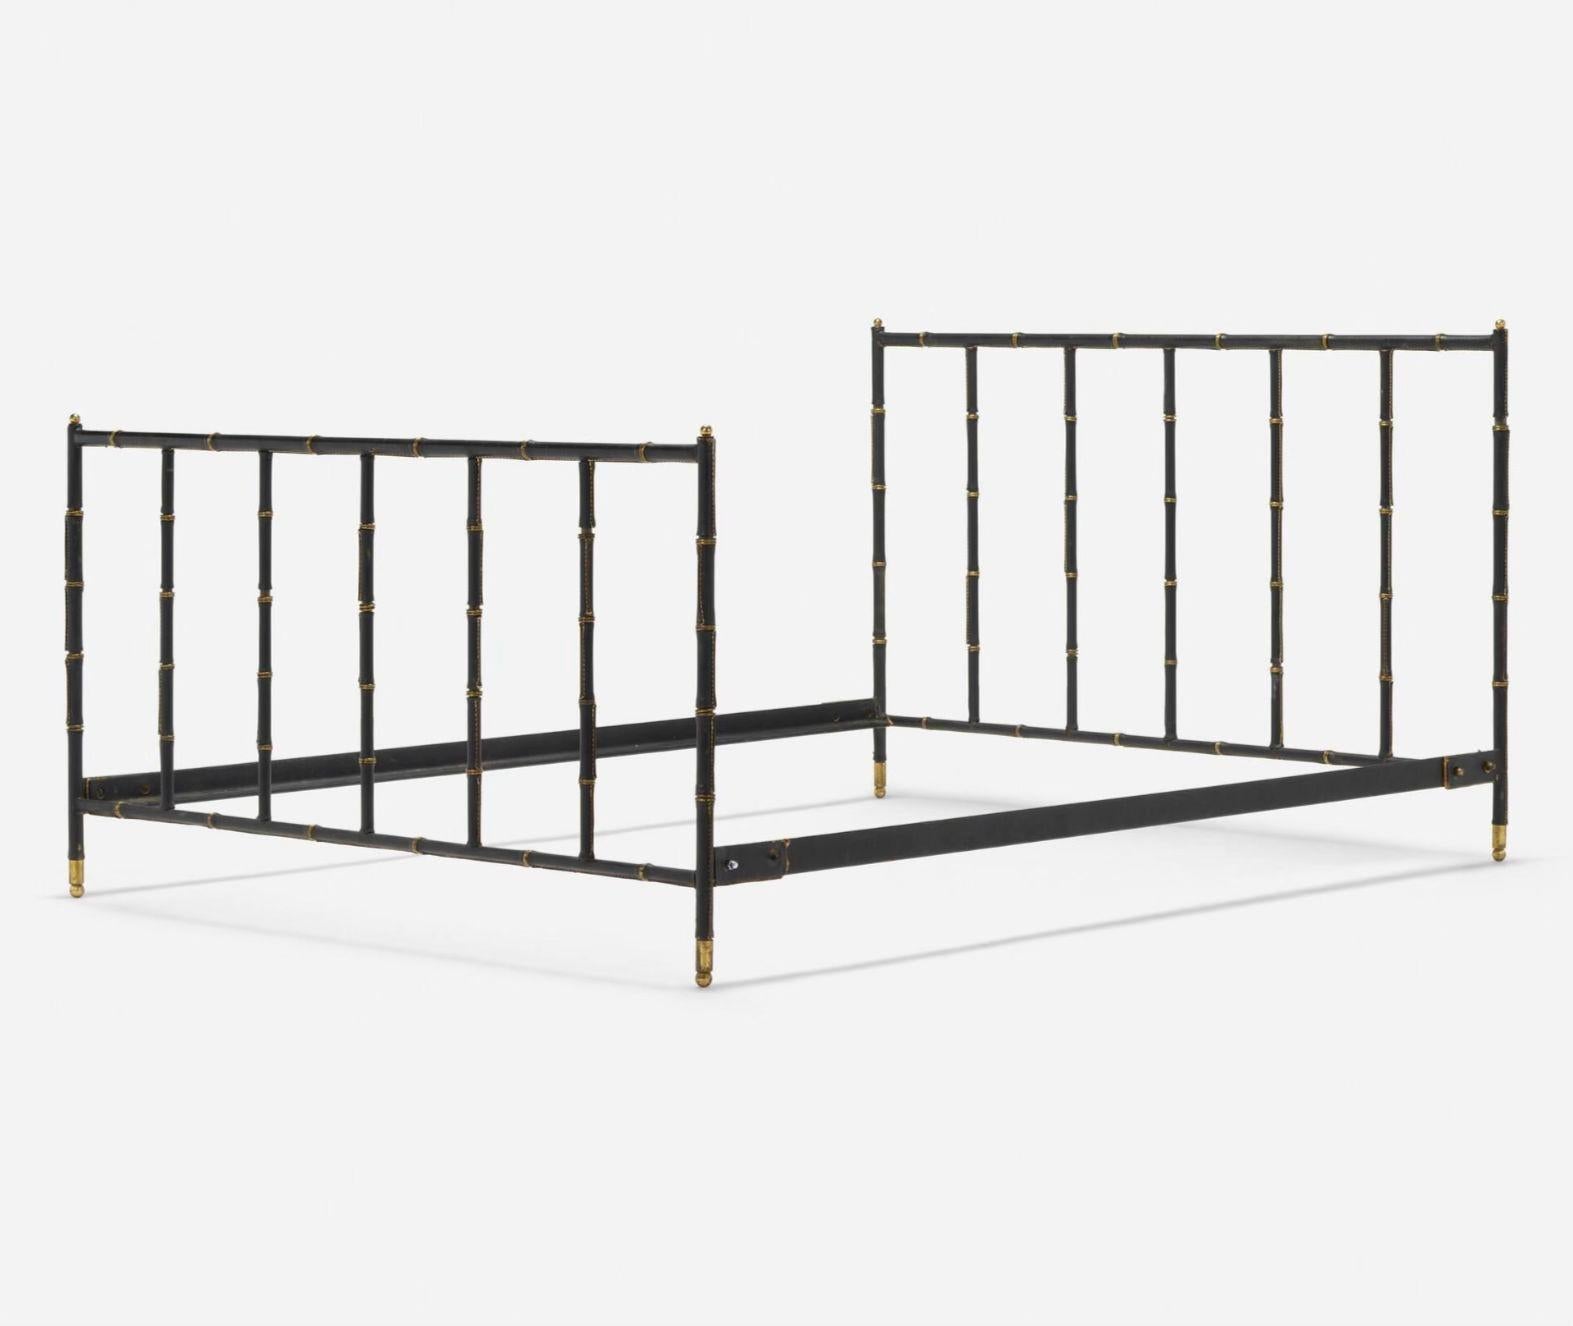 Jacques Adnet Leather and Brass Full Size Bed Frame, France 1950. Bed frame is saddle stitched leather over steel, brass. Bed frame shows beautiful rich patina.
Measures 37